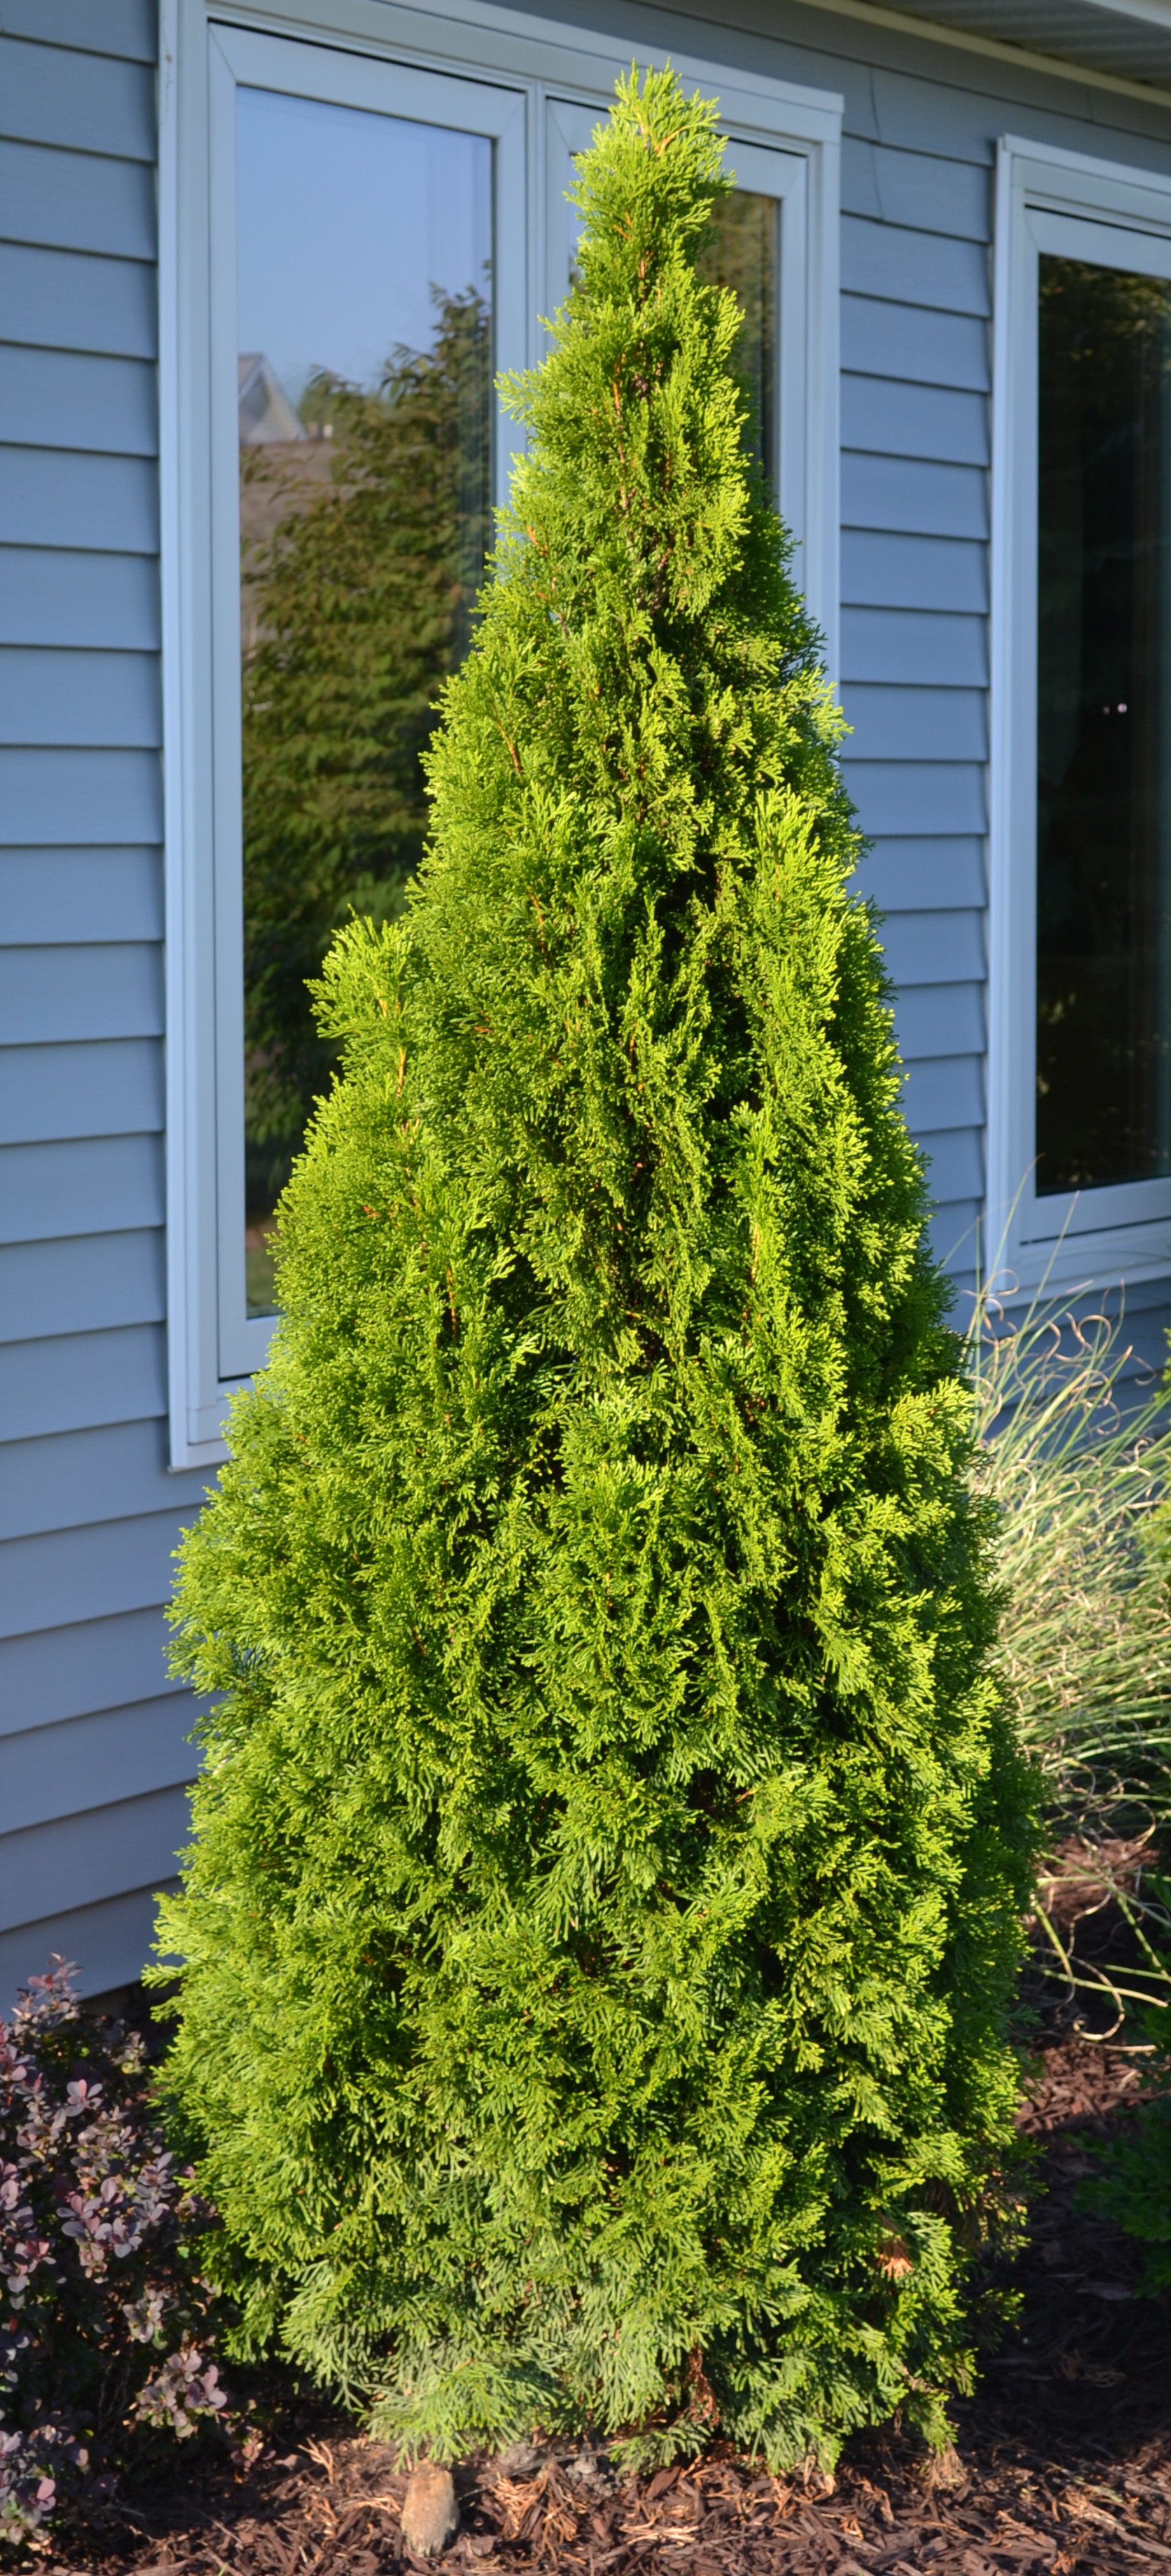 Emerald Green Arborvitae Spacing For Privacy - emerald green arborvitae spacing for privacy